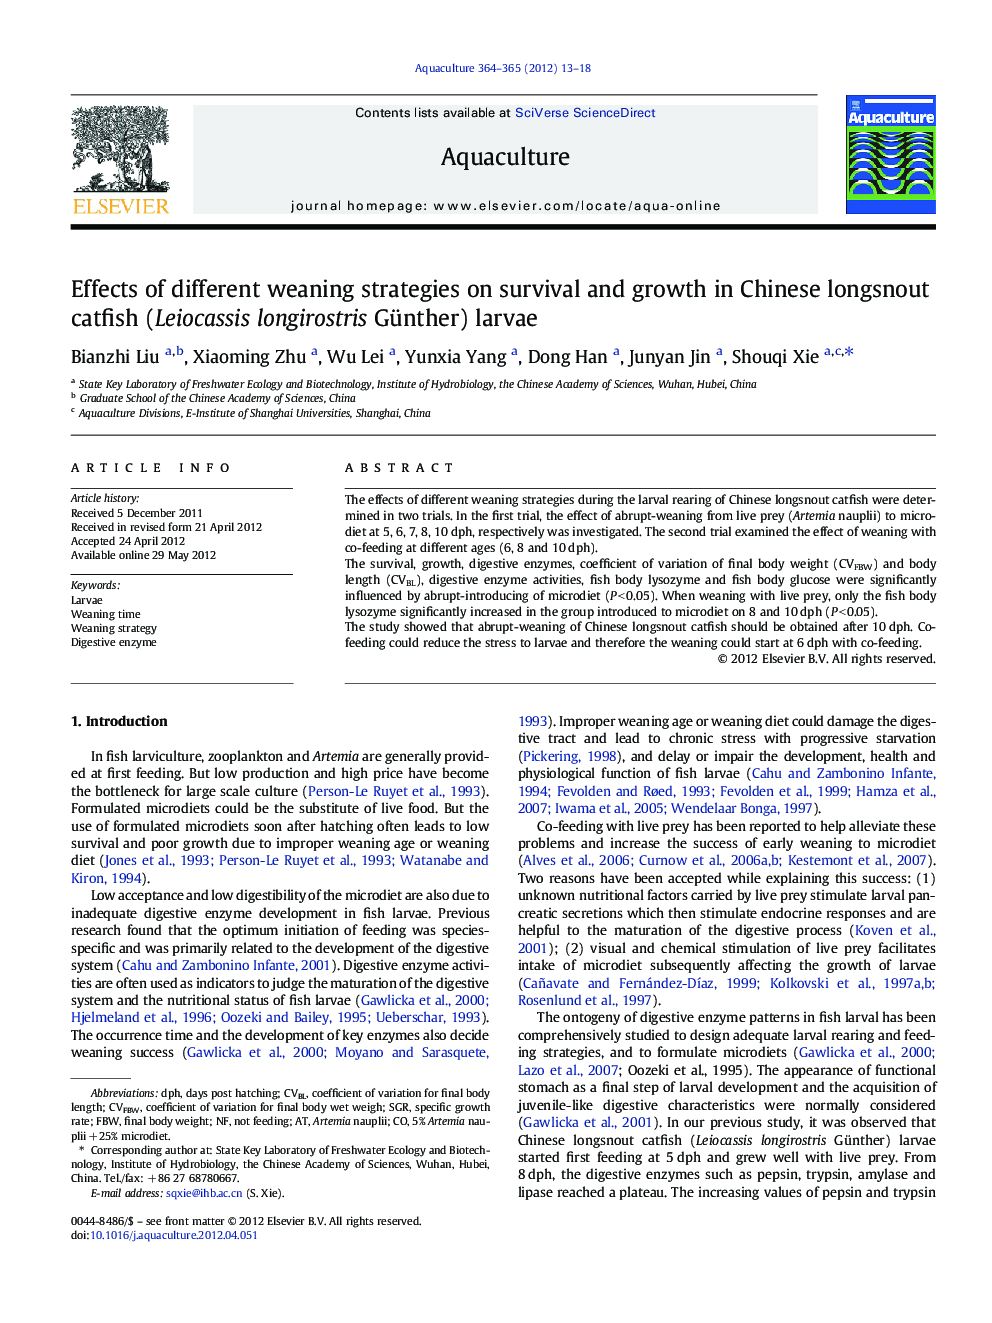 Effects of different weaning strategies on survival and growth in Chinese longsnout catfish (Leiocassis longirostris Günther) larvae